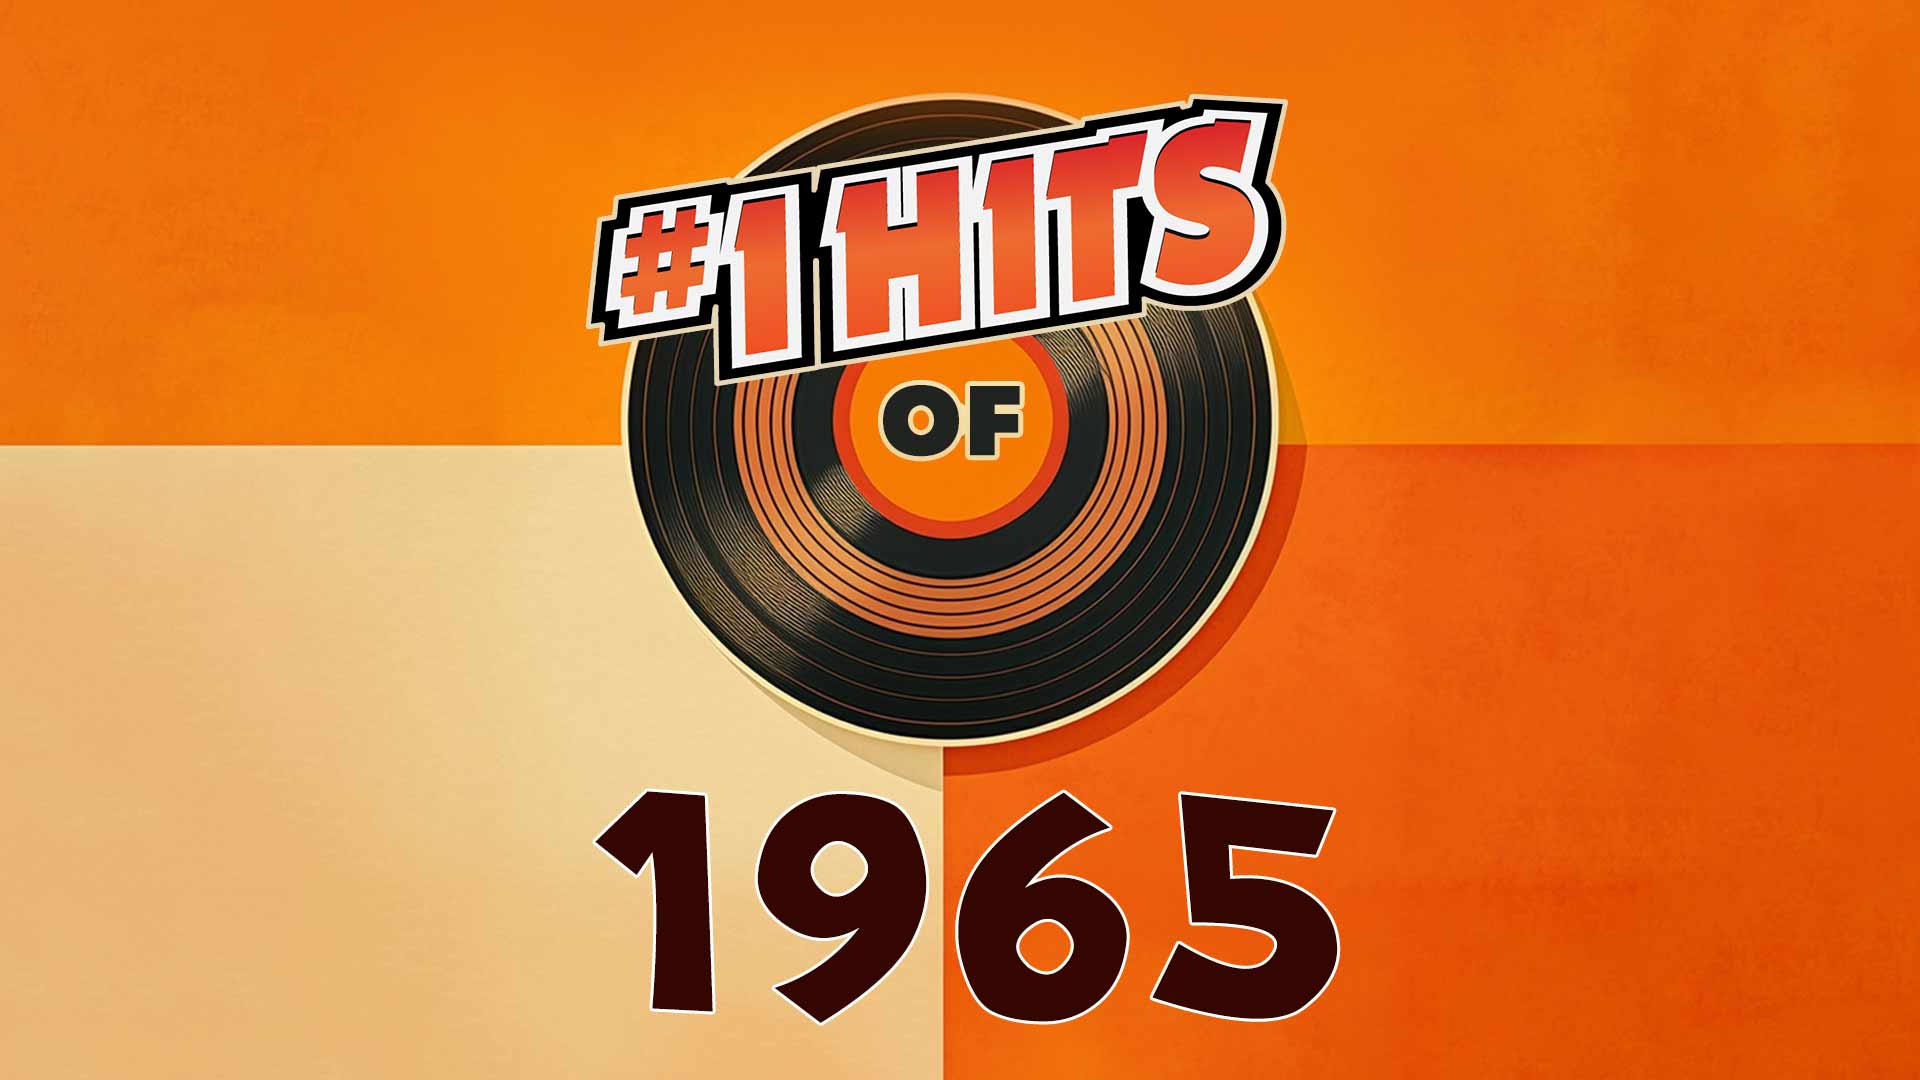 The Number One Hits Of 1965